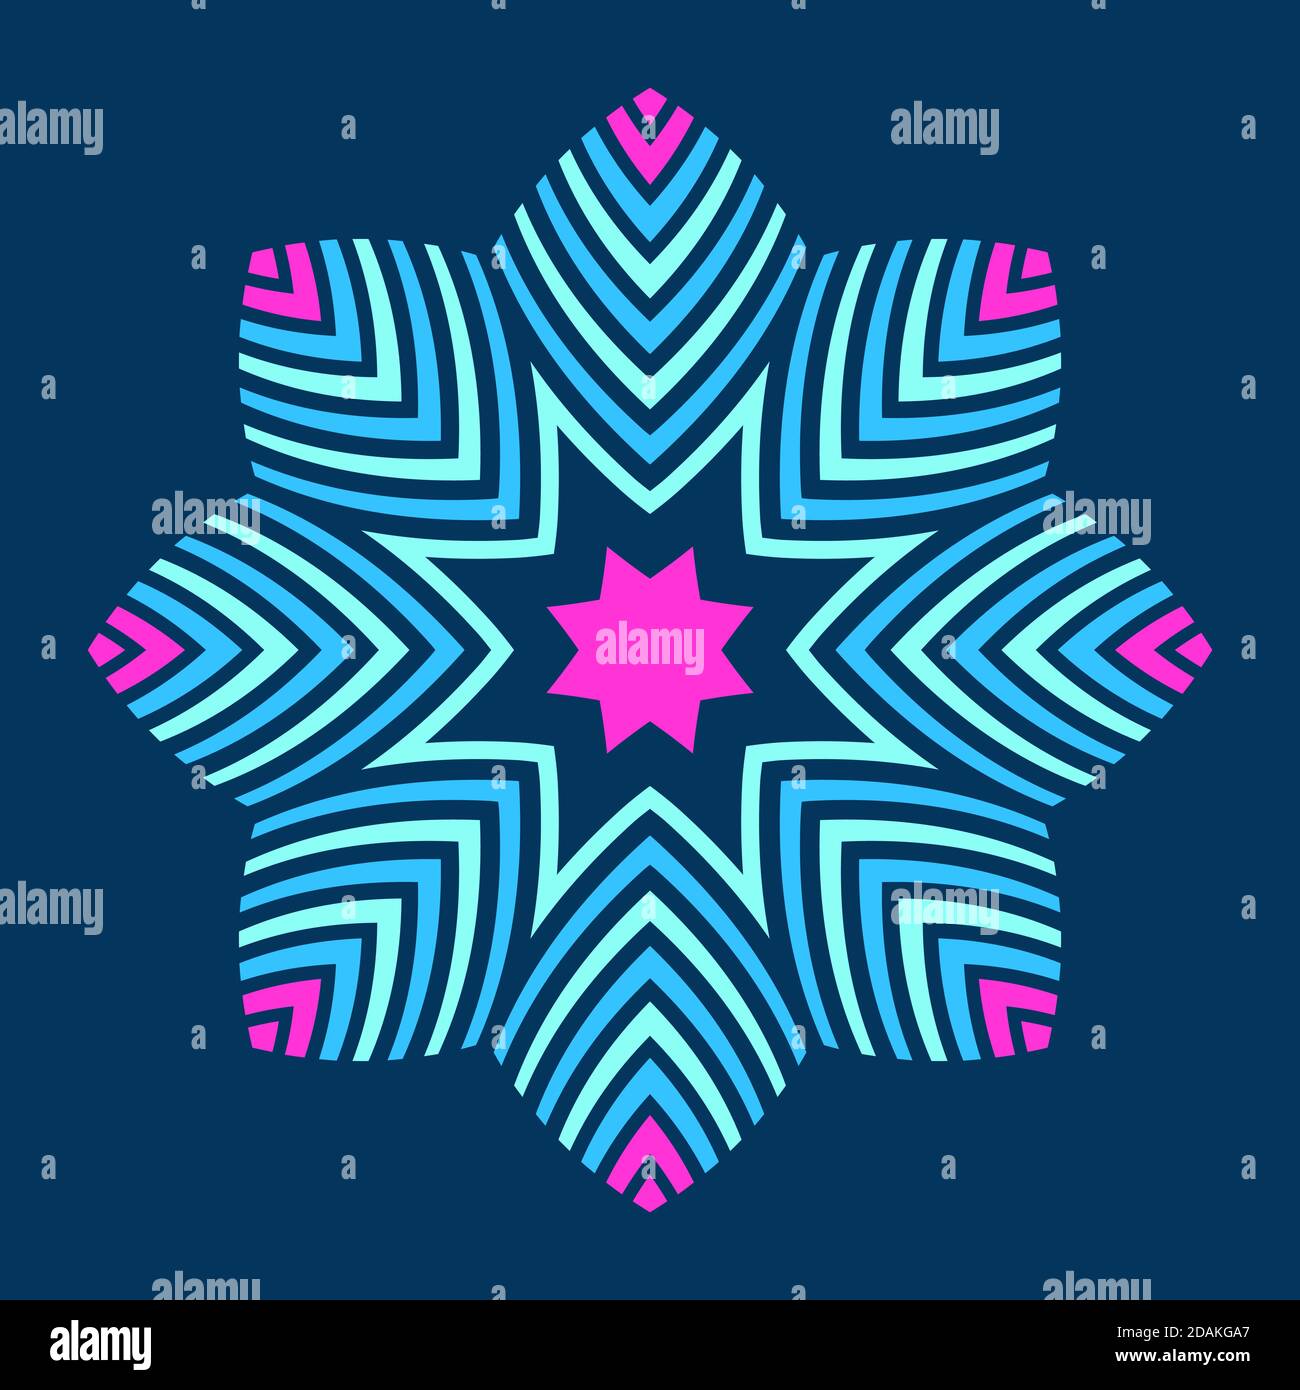 Abstract colorful symmetric symbol isolated on dark background. Stylized flower with striped petals. Logo. Design element. Star, snowflake. Geometric Stock Vector